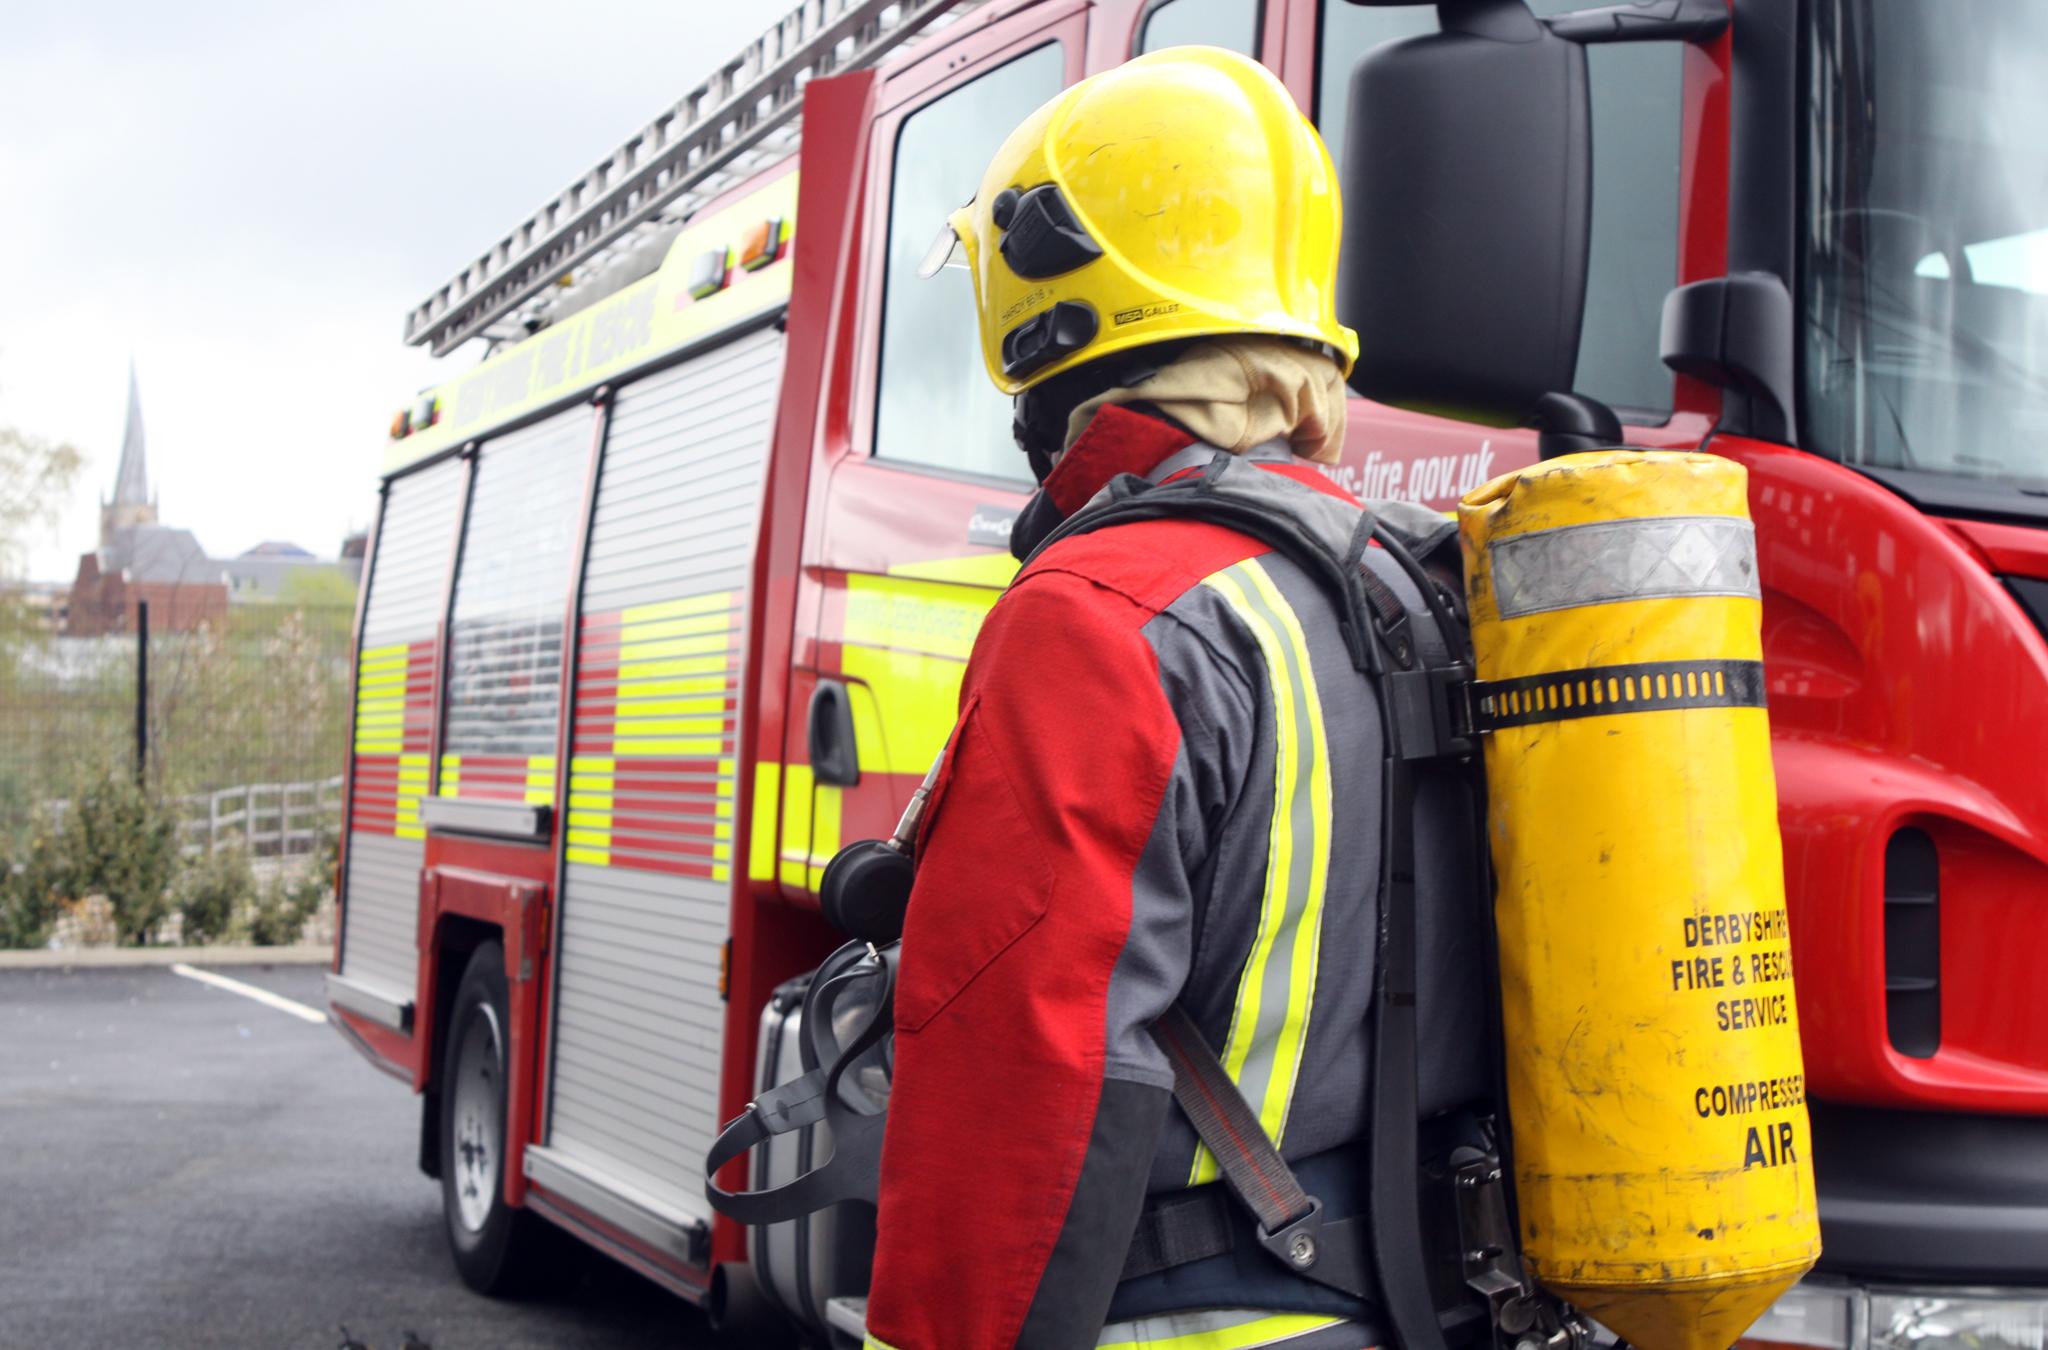 Two house fires tackled in Doncaster - The Star